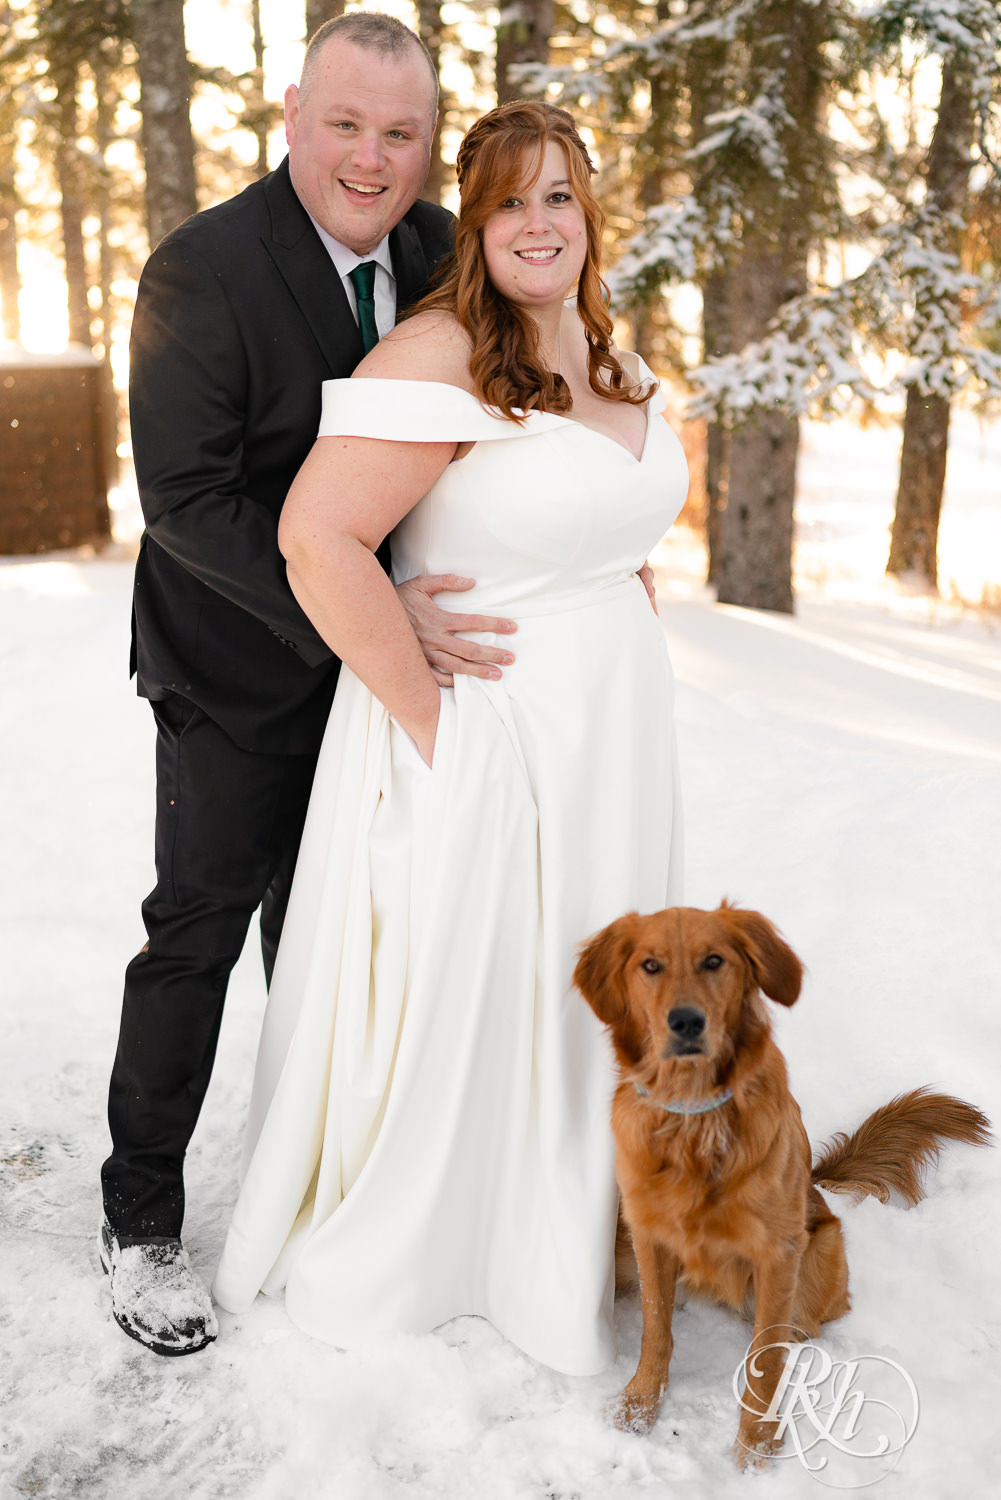 Bride and groom with their Golden Retriever at Grand Superior Lodge in Two Harbors, Minnesota.